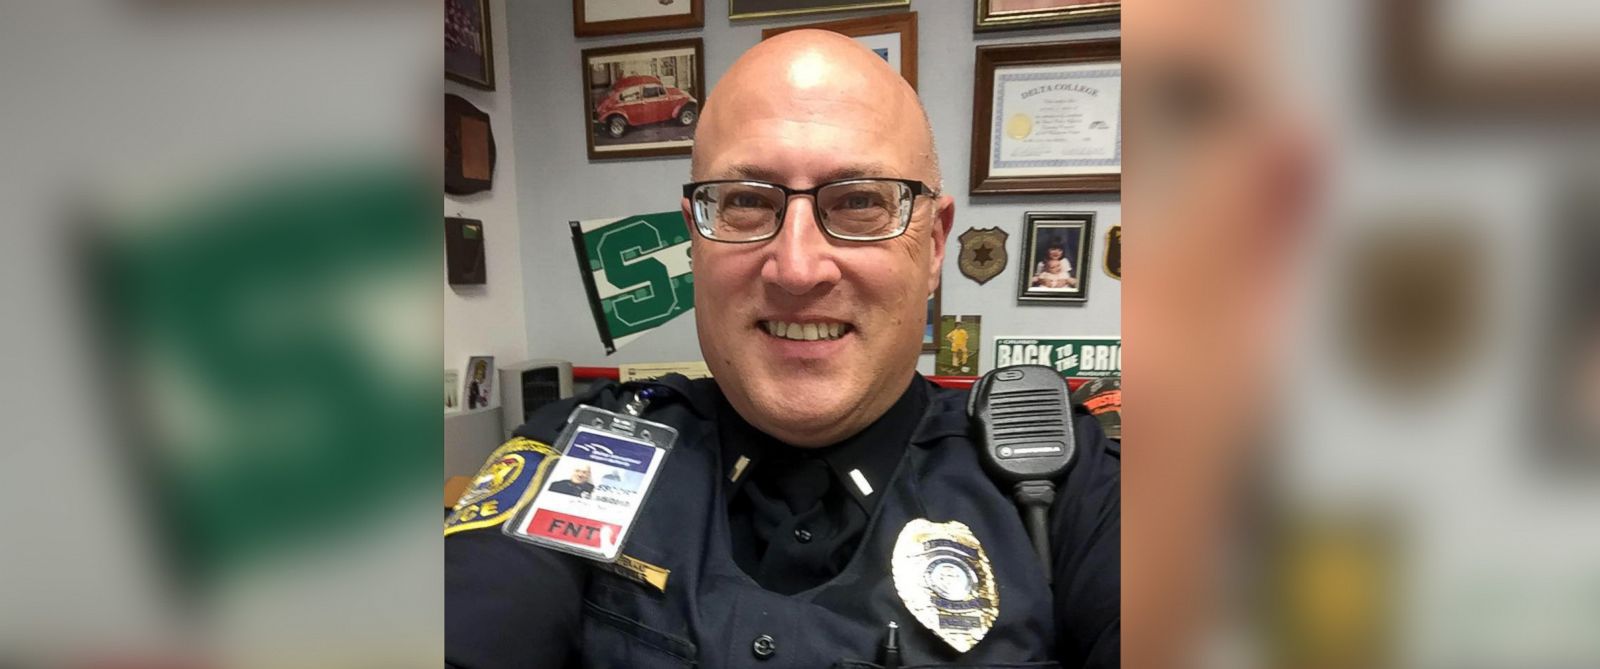 PHOTO: Lt. Jeff Neville, an airport police officer at Bishop International Airport in Flint, Michigan, was stabbed at the airport on June 21, 2017.